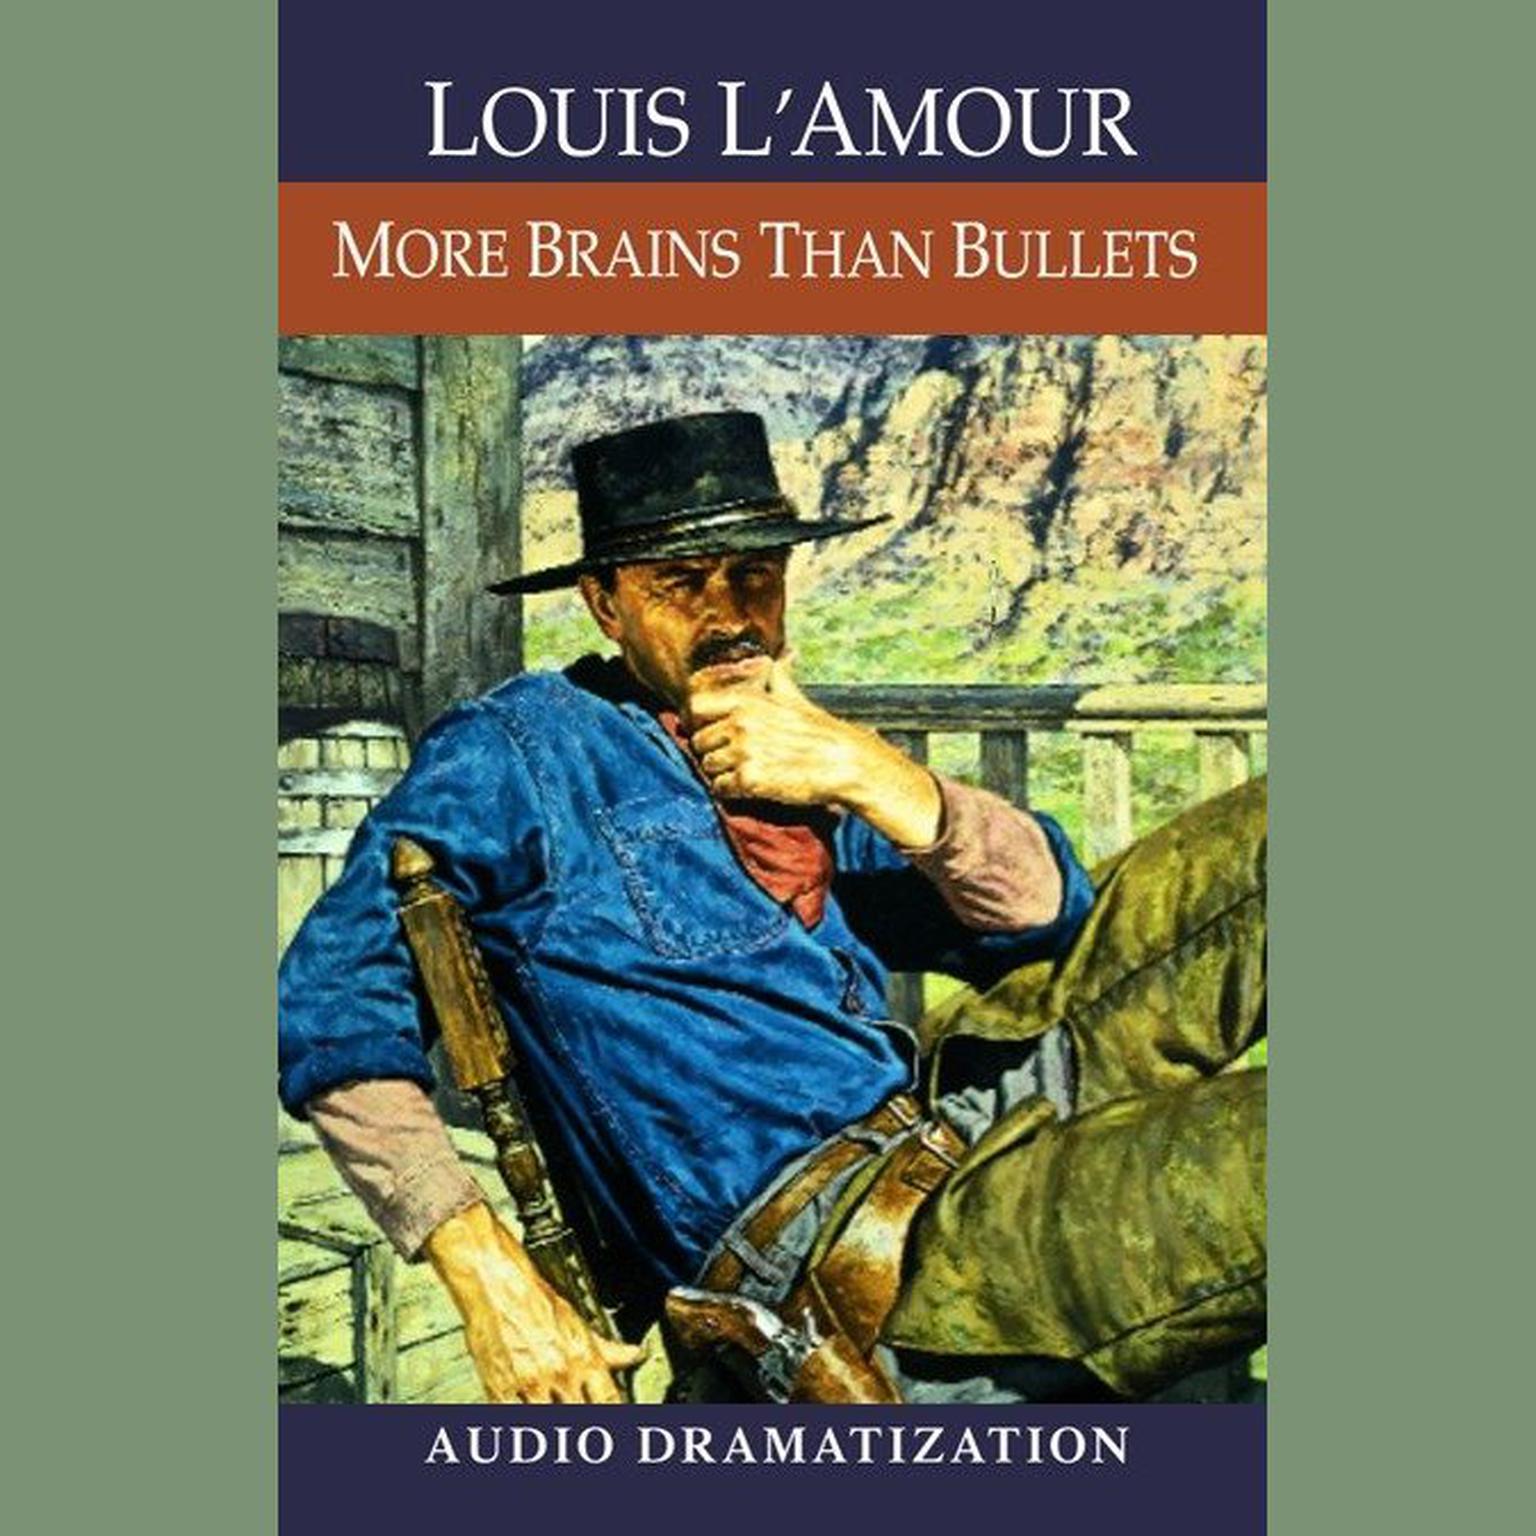 More Brains Than Bullets (Abridged) Audiobook, by Louis L’Amour